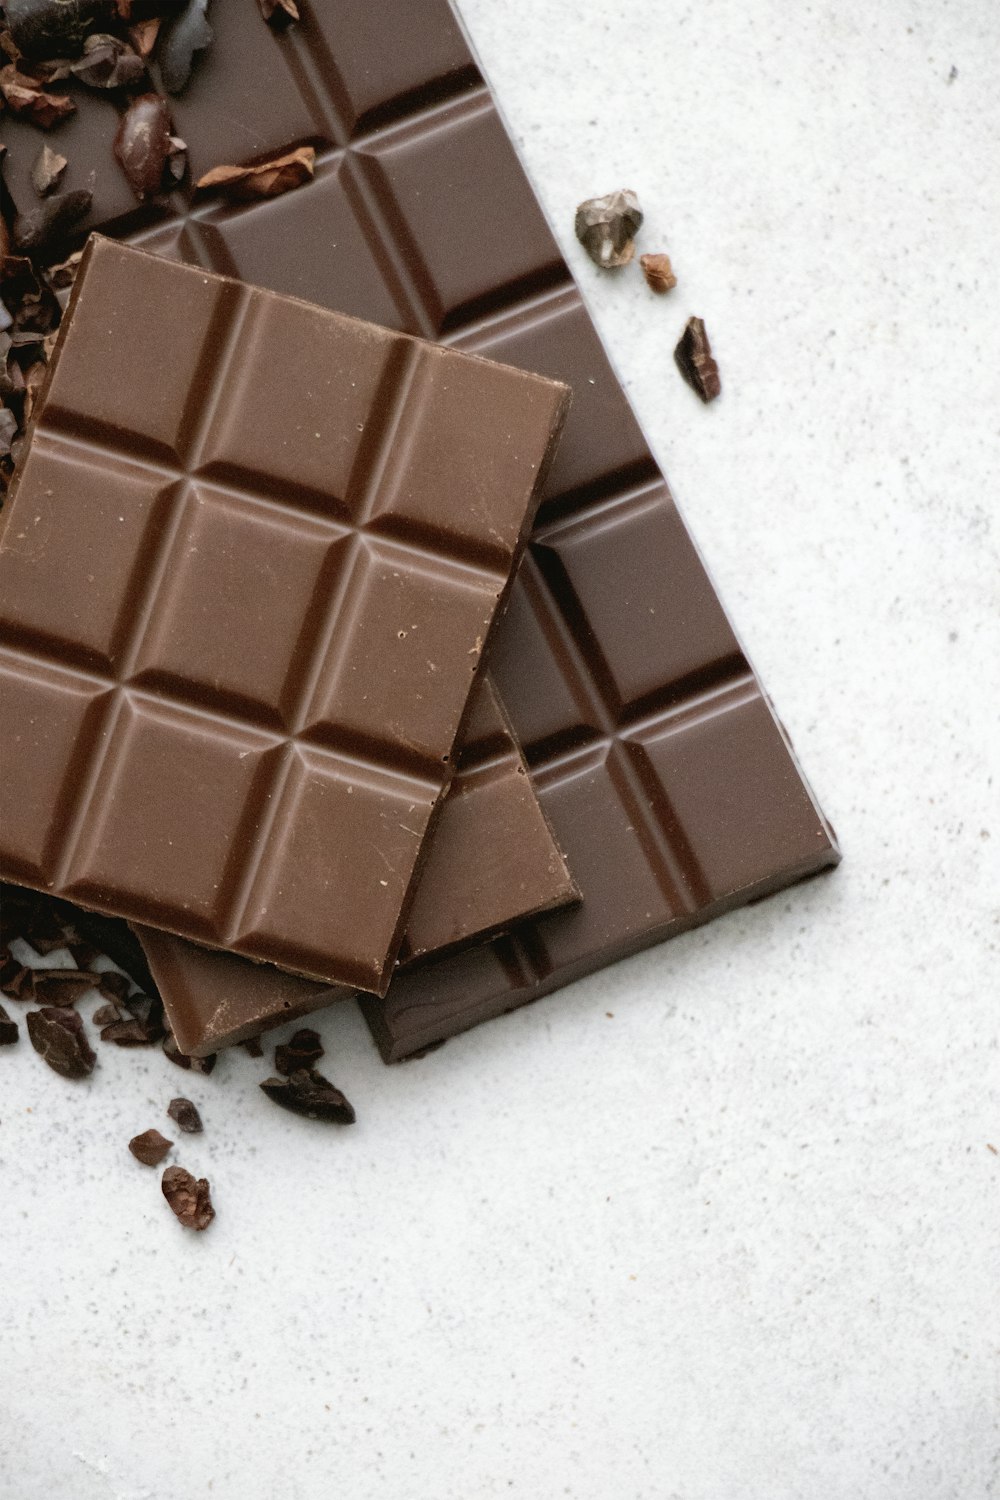 1000+ Chocolate Bar Pictures | Download Free Images on Unsplash